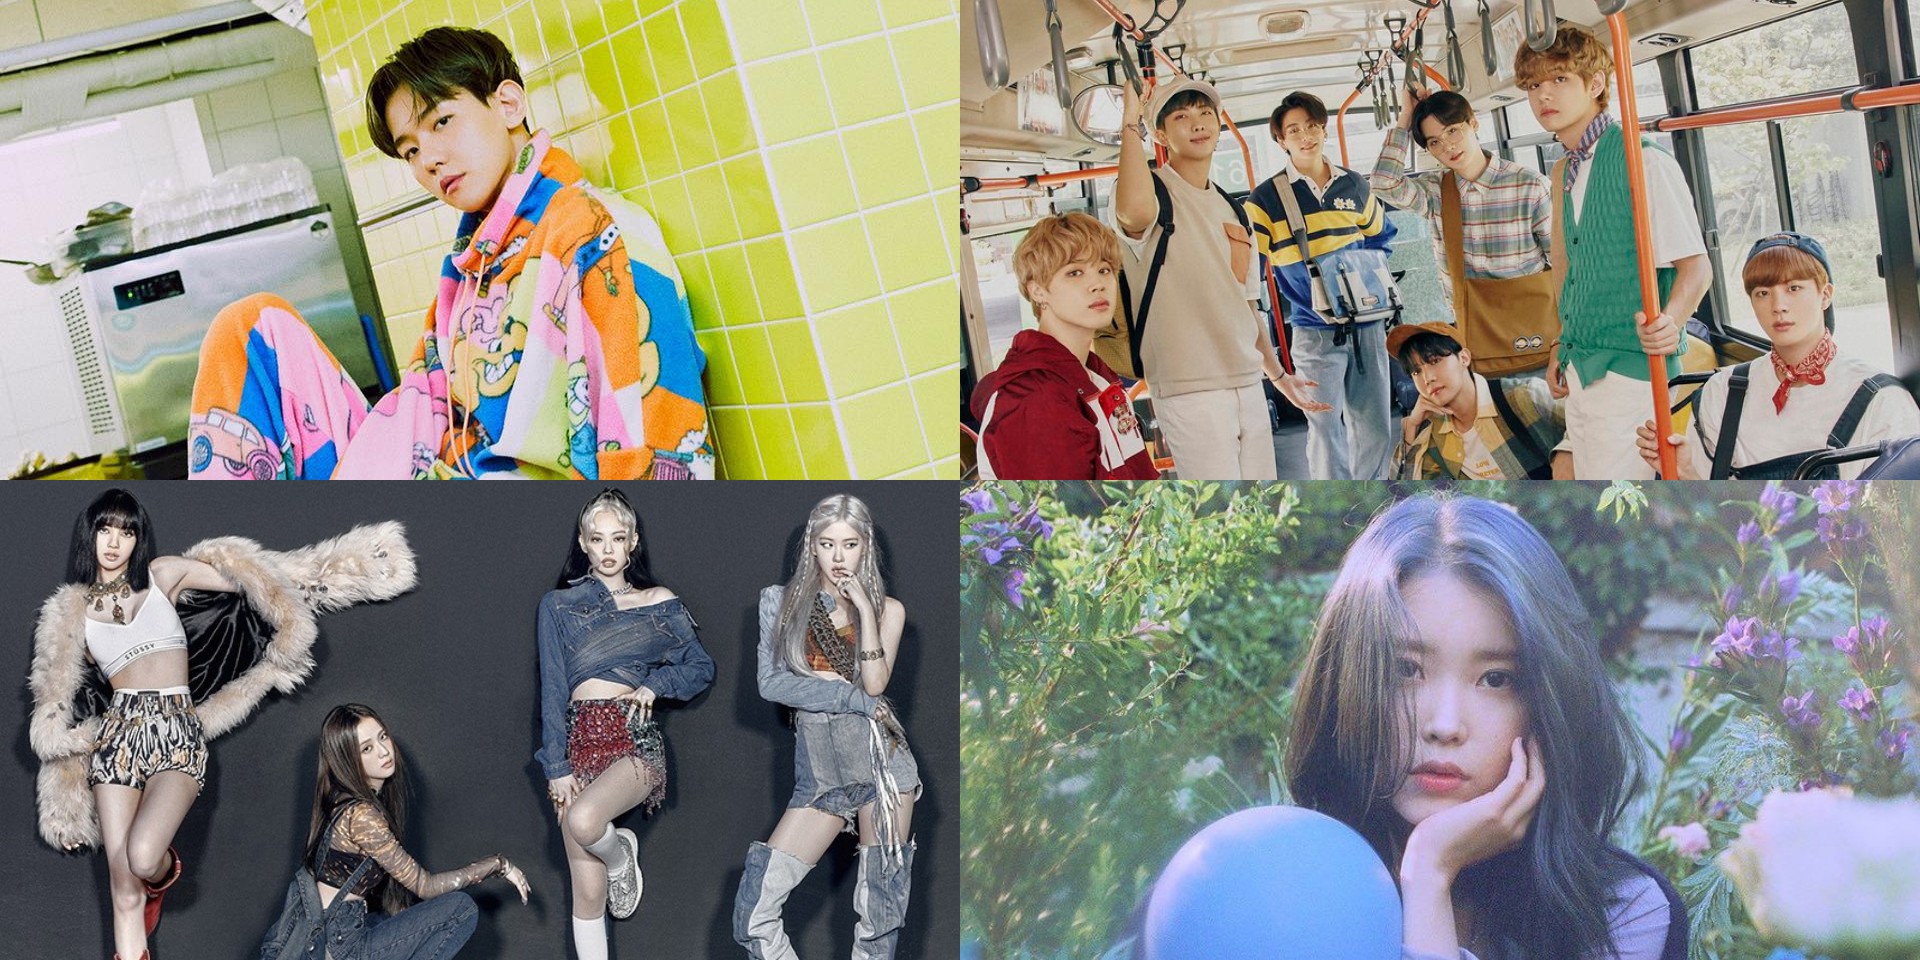 2020 Melon Music Awards announce Top 10 Artists – BLACKPINK, BTS, EXO's Baekhyun, IU, and more, plus full list of nominees